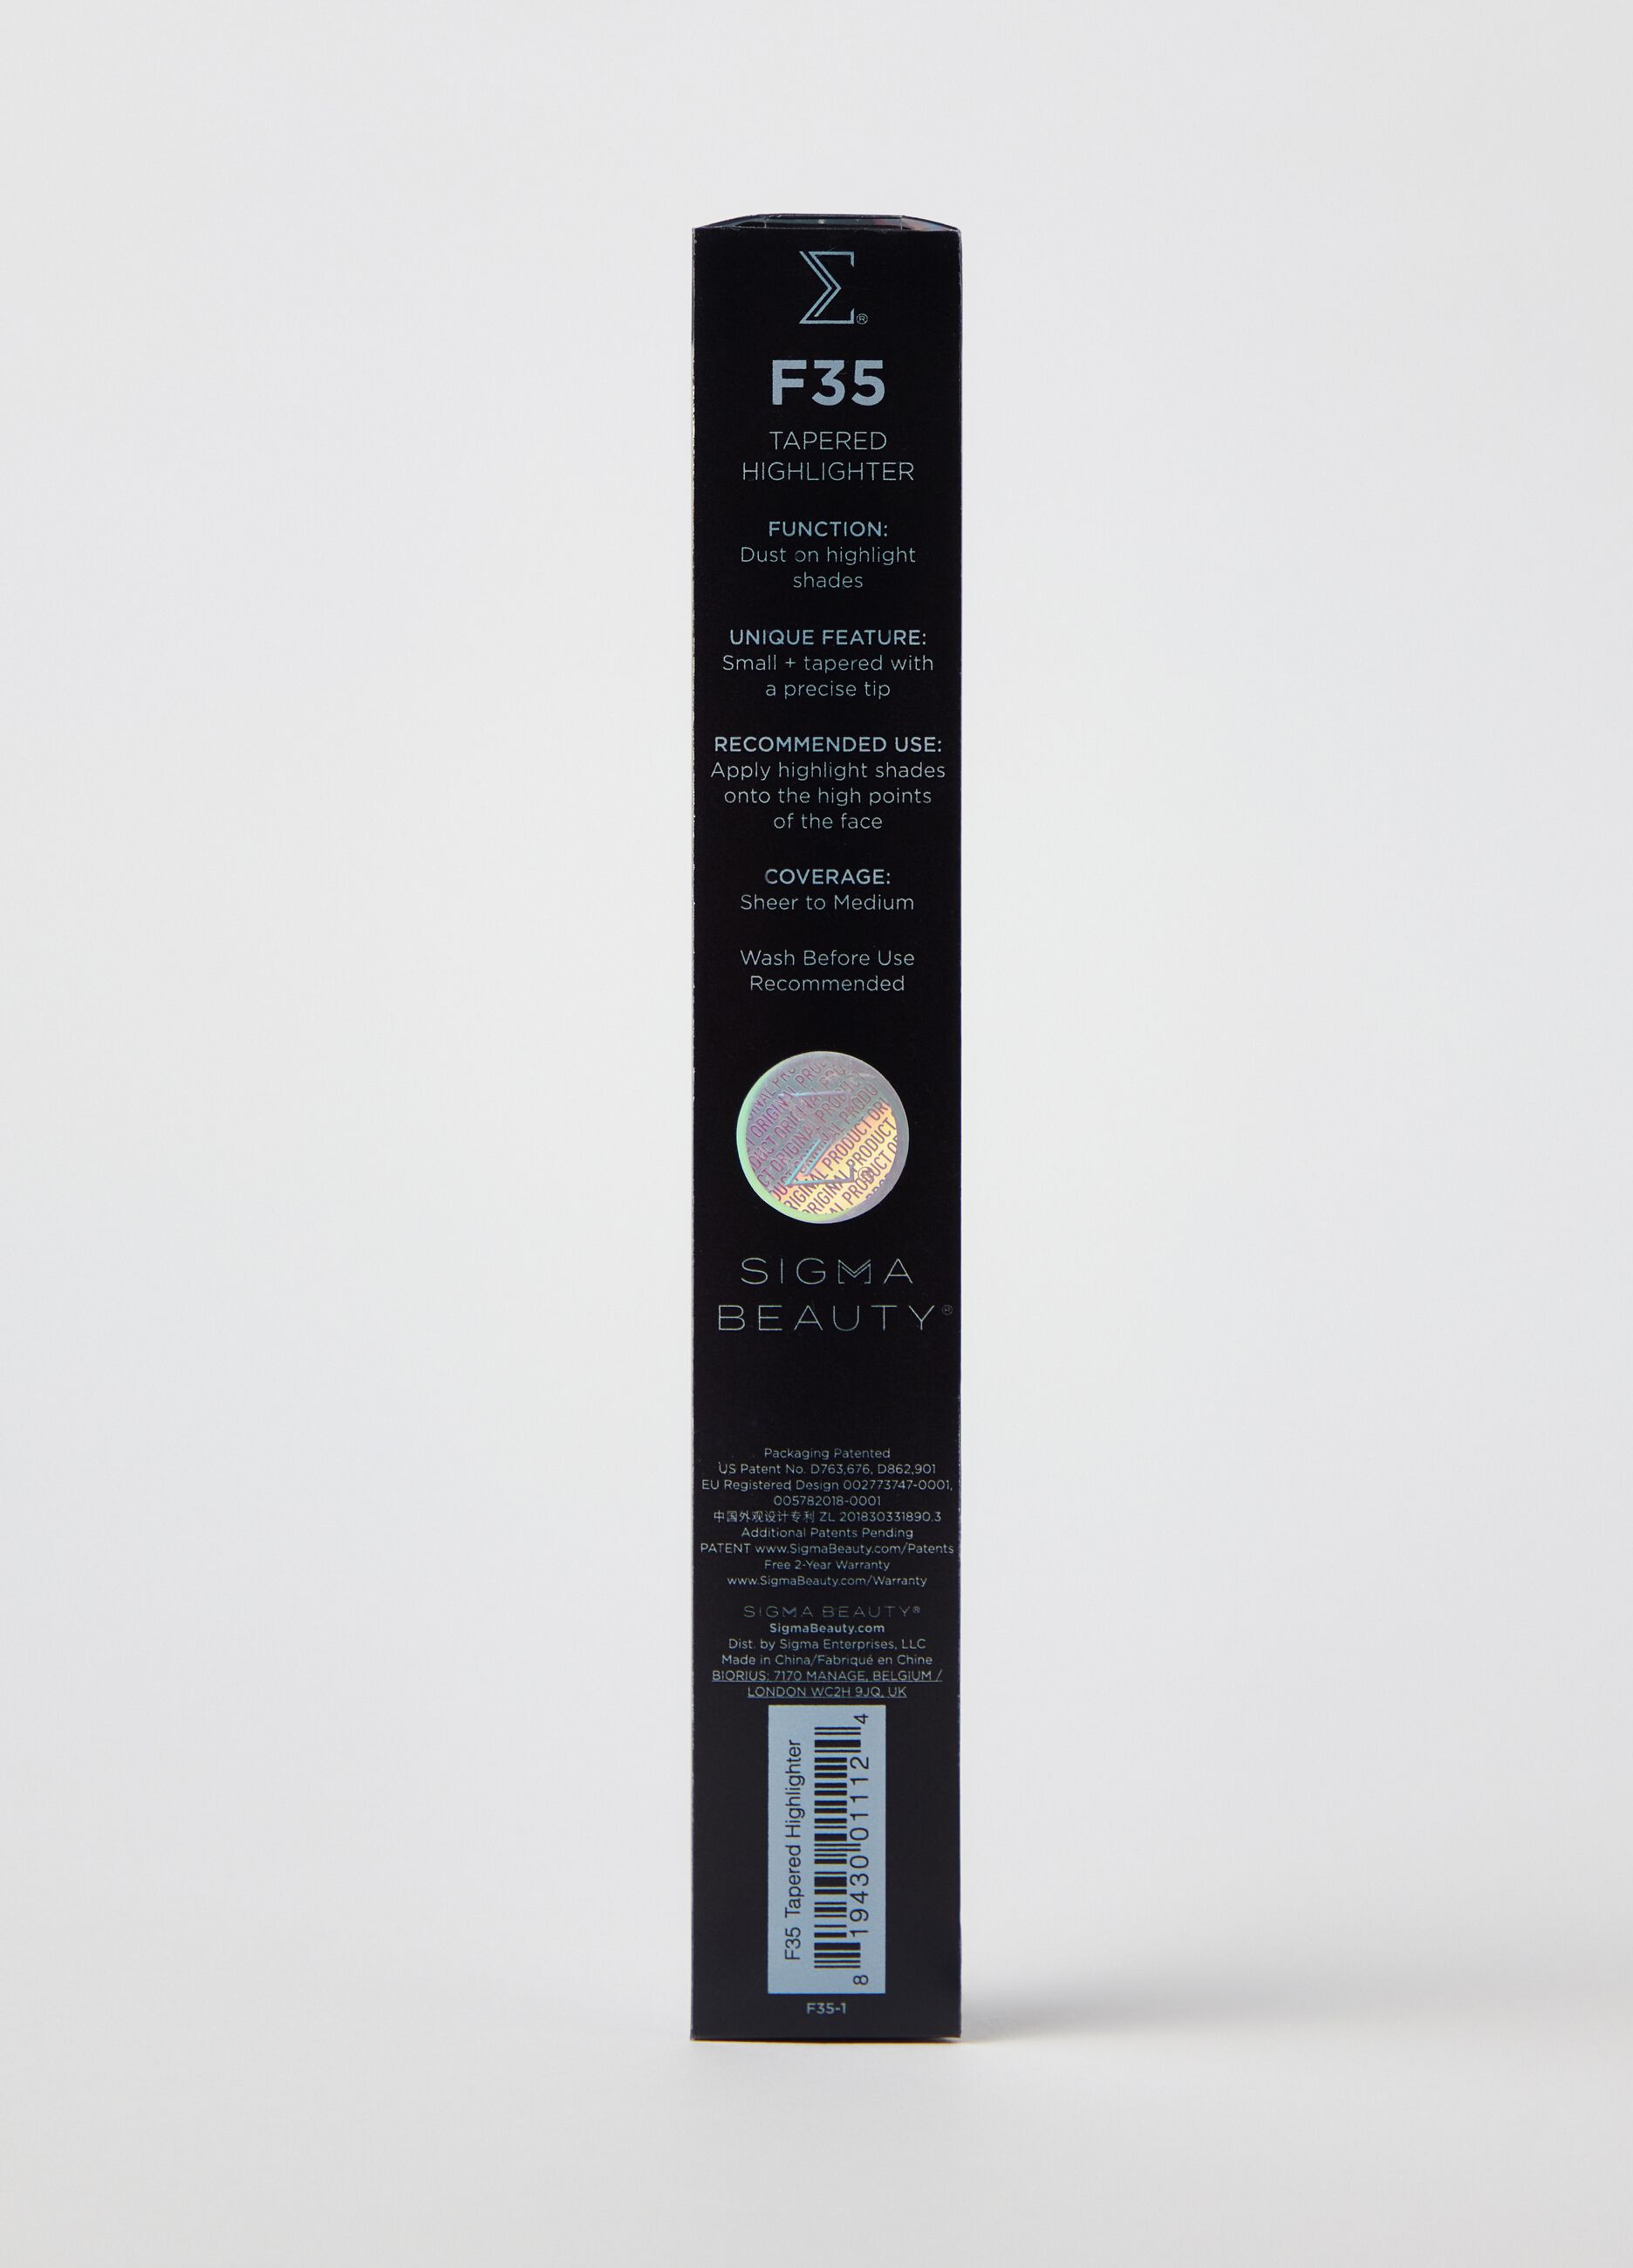 F35 Pennello Make up Highlighter